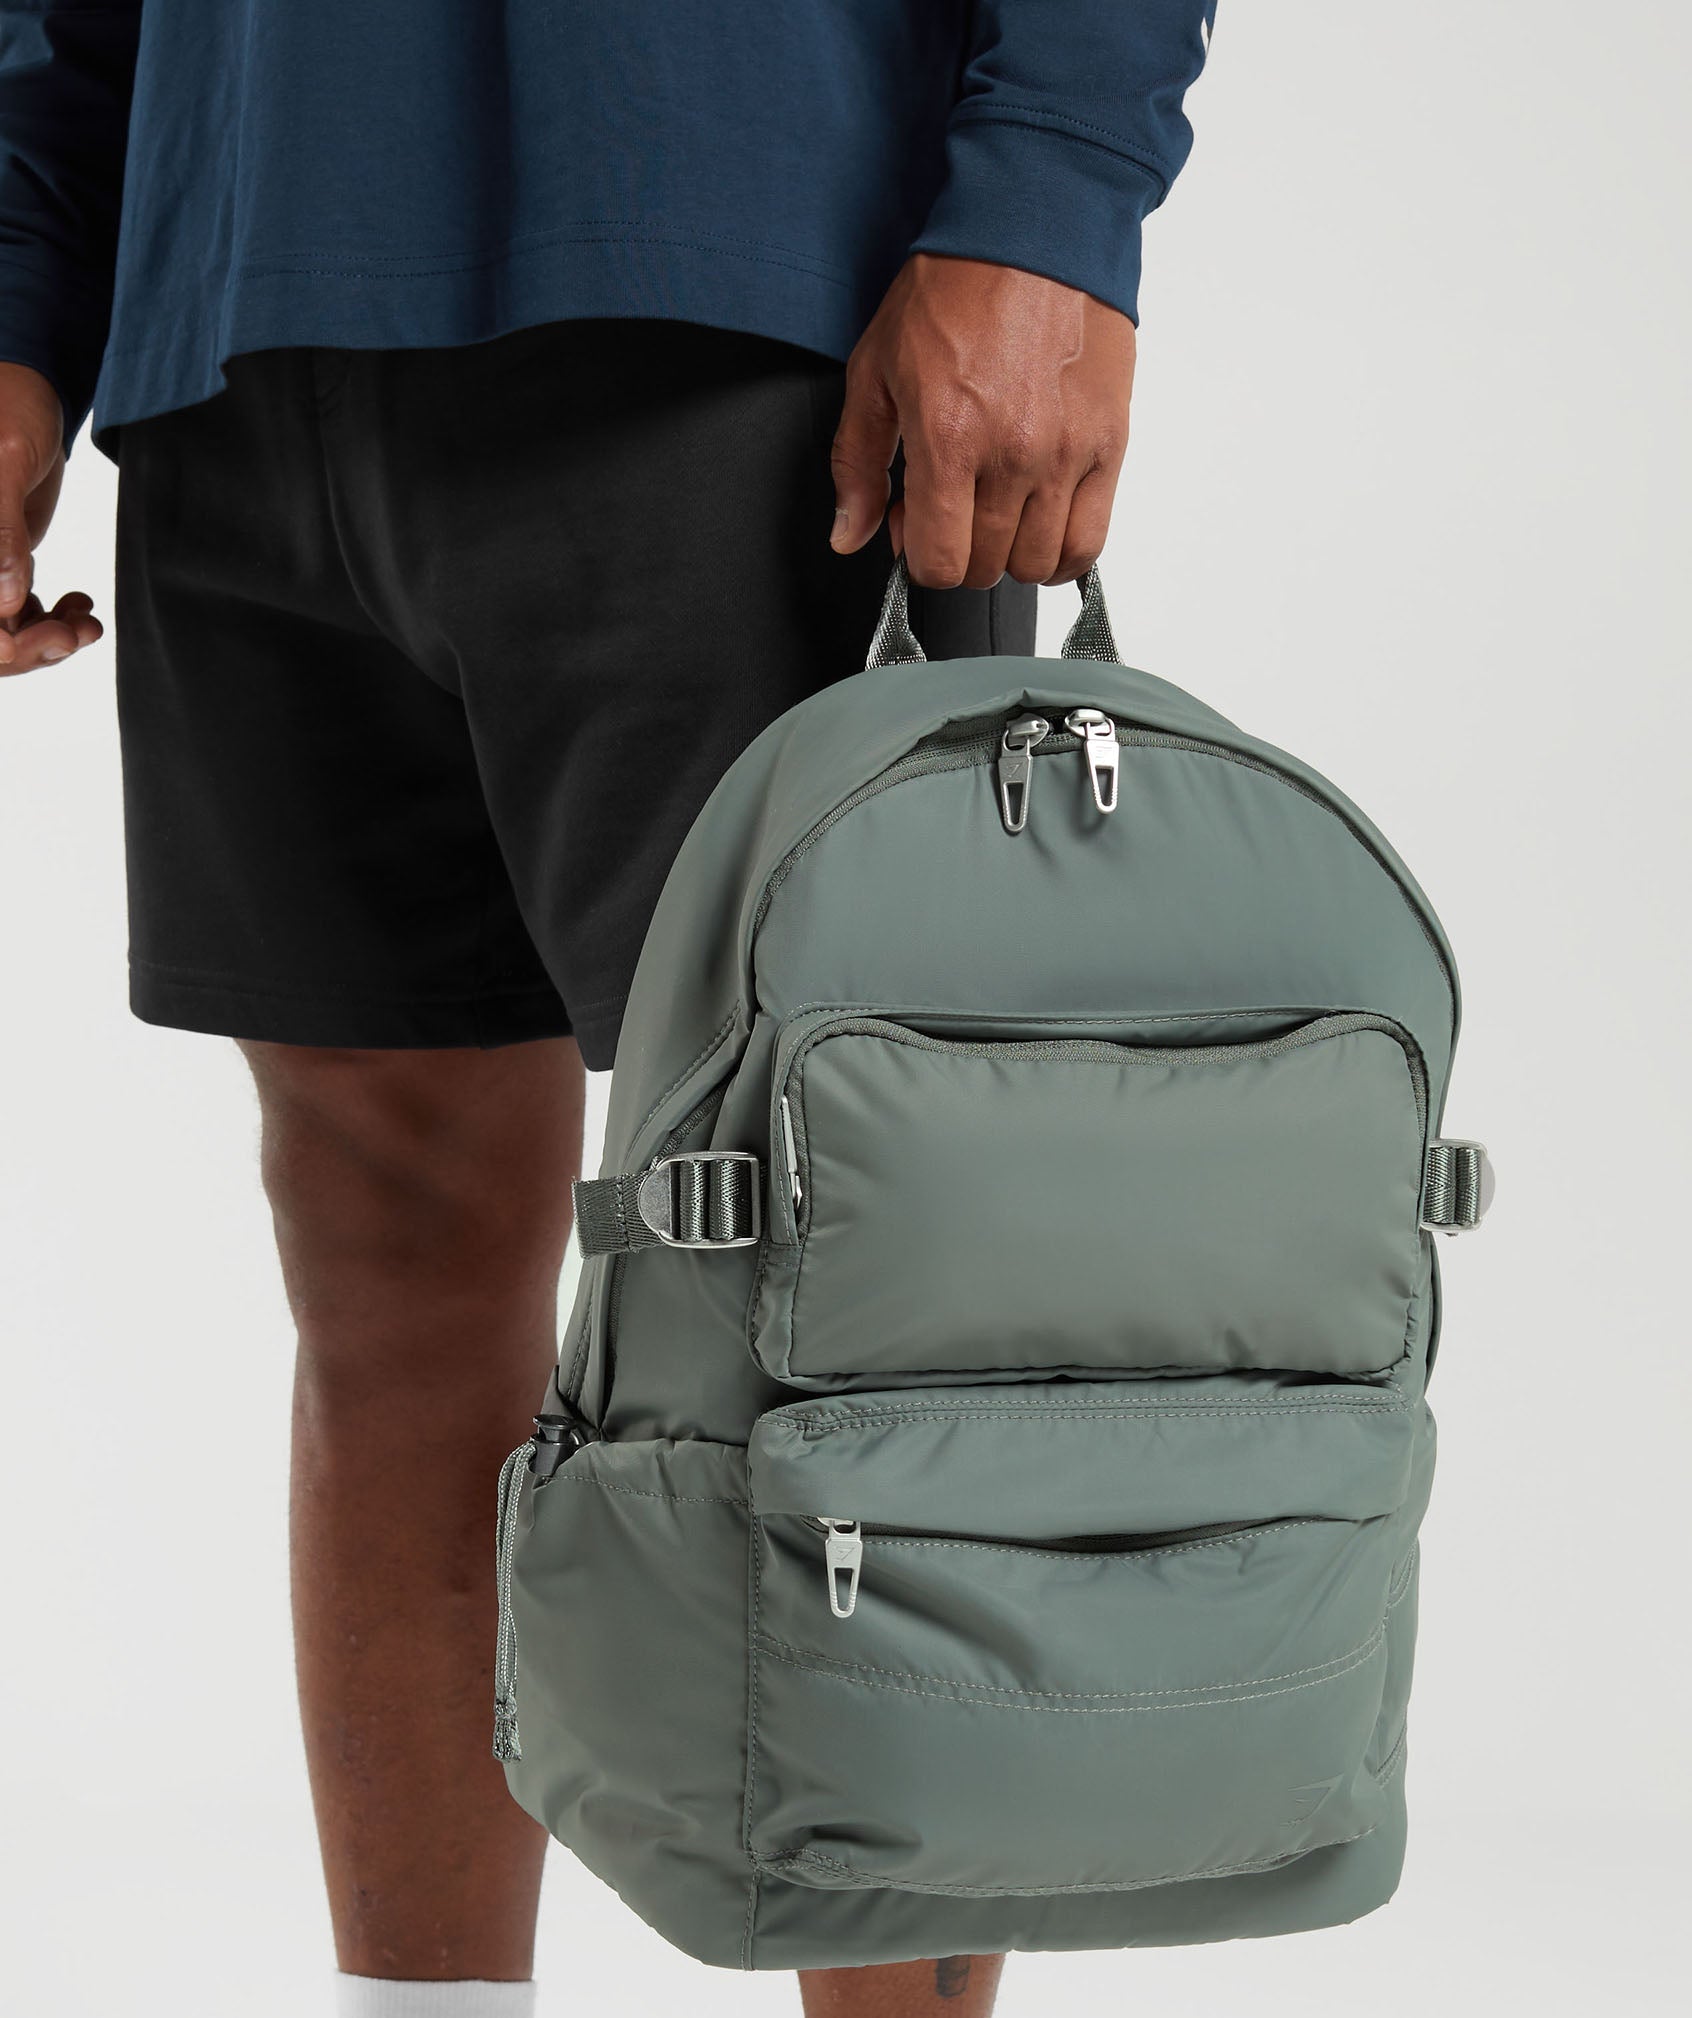 Premium Lifestyle Backpack in Dusk Green - view 6